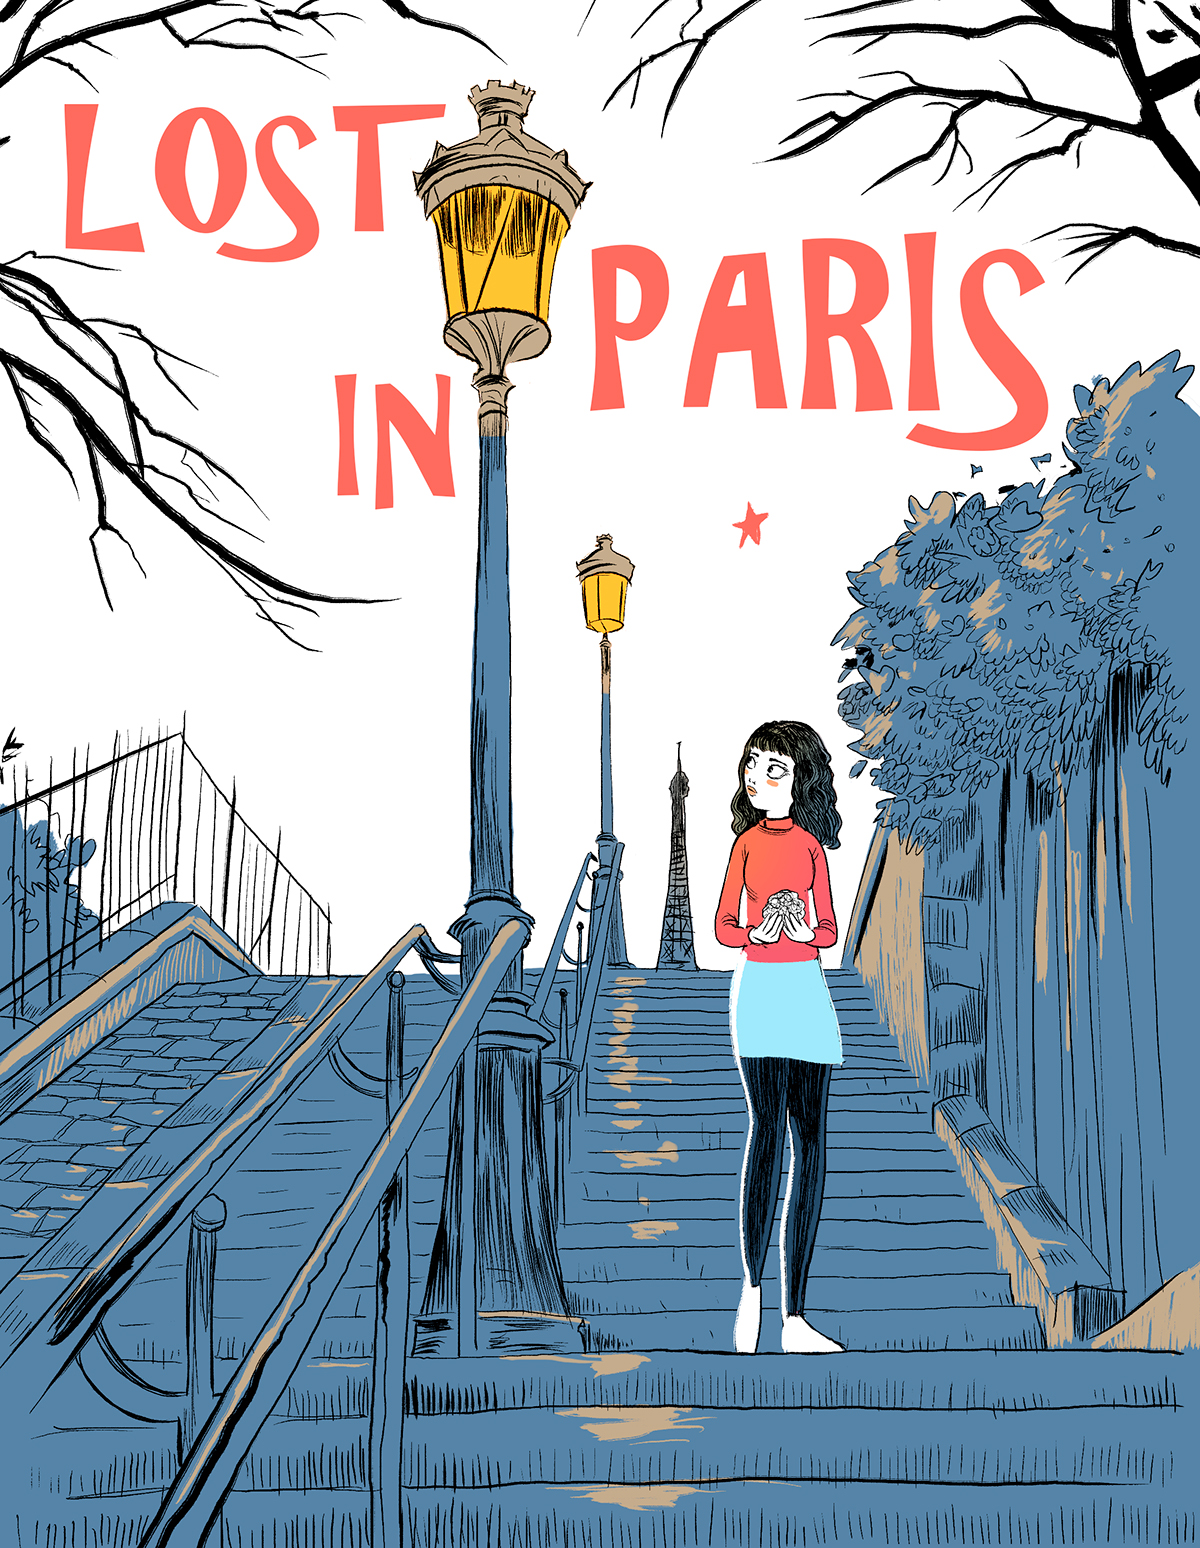 Paris lost cover stairs girl